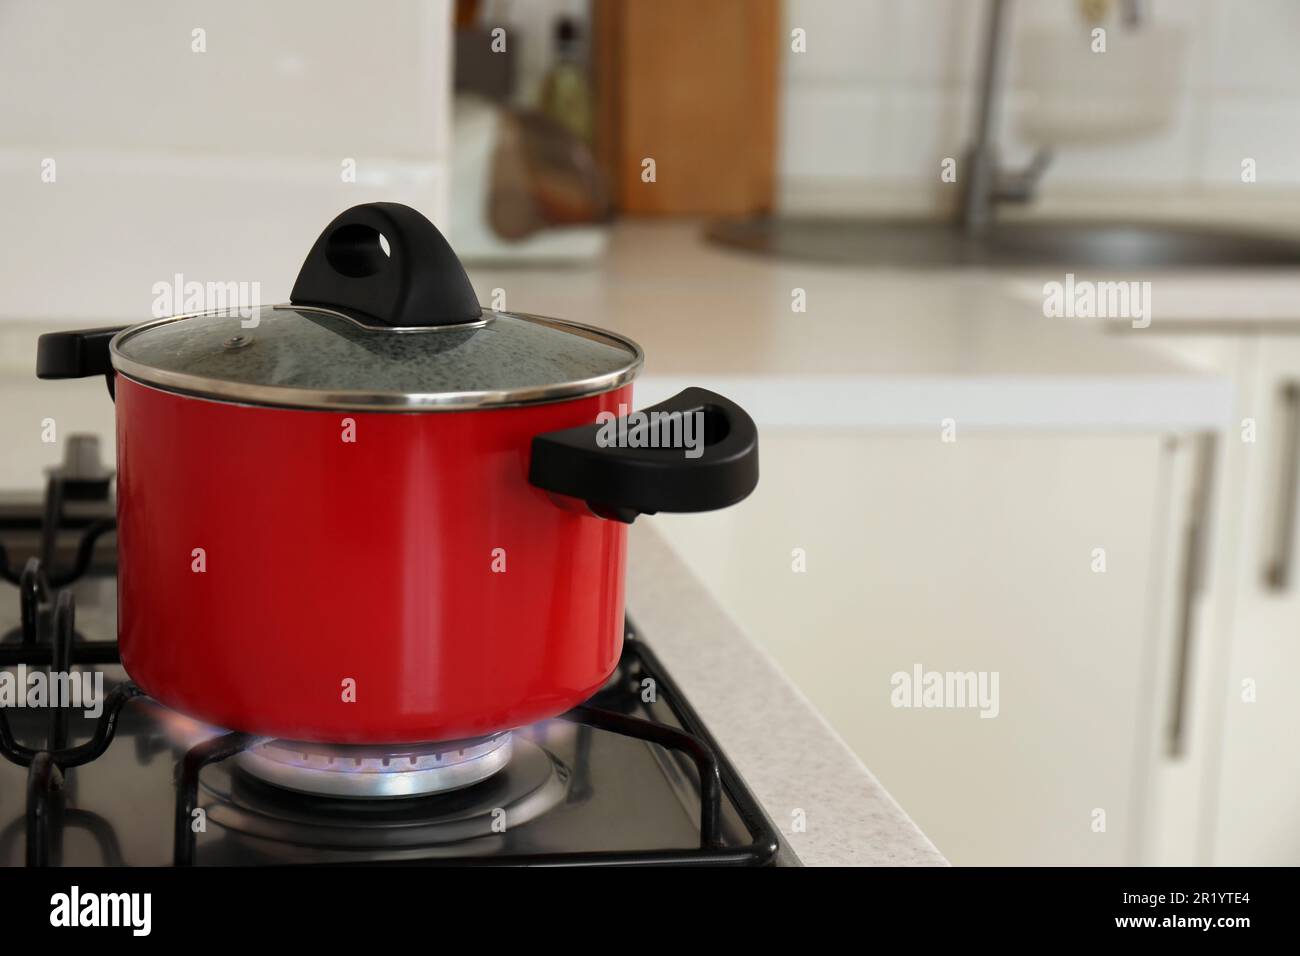 https://c8.alamy.com/comp/2R1YTE4/red-pot-on-modern-kitchen-stove-with-burning-gas-space-for-text-2R1YTE4.jpg